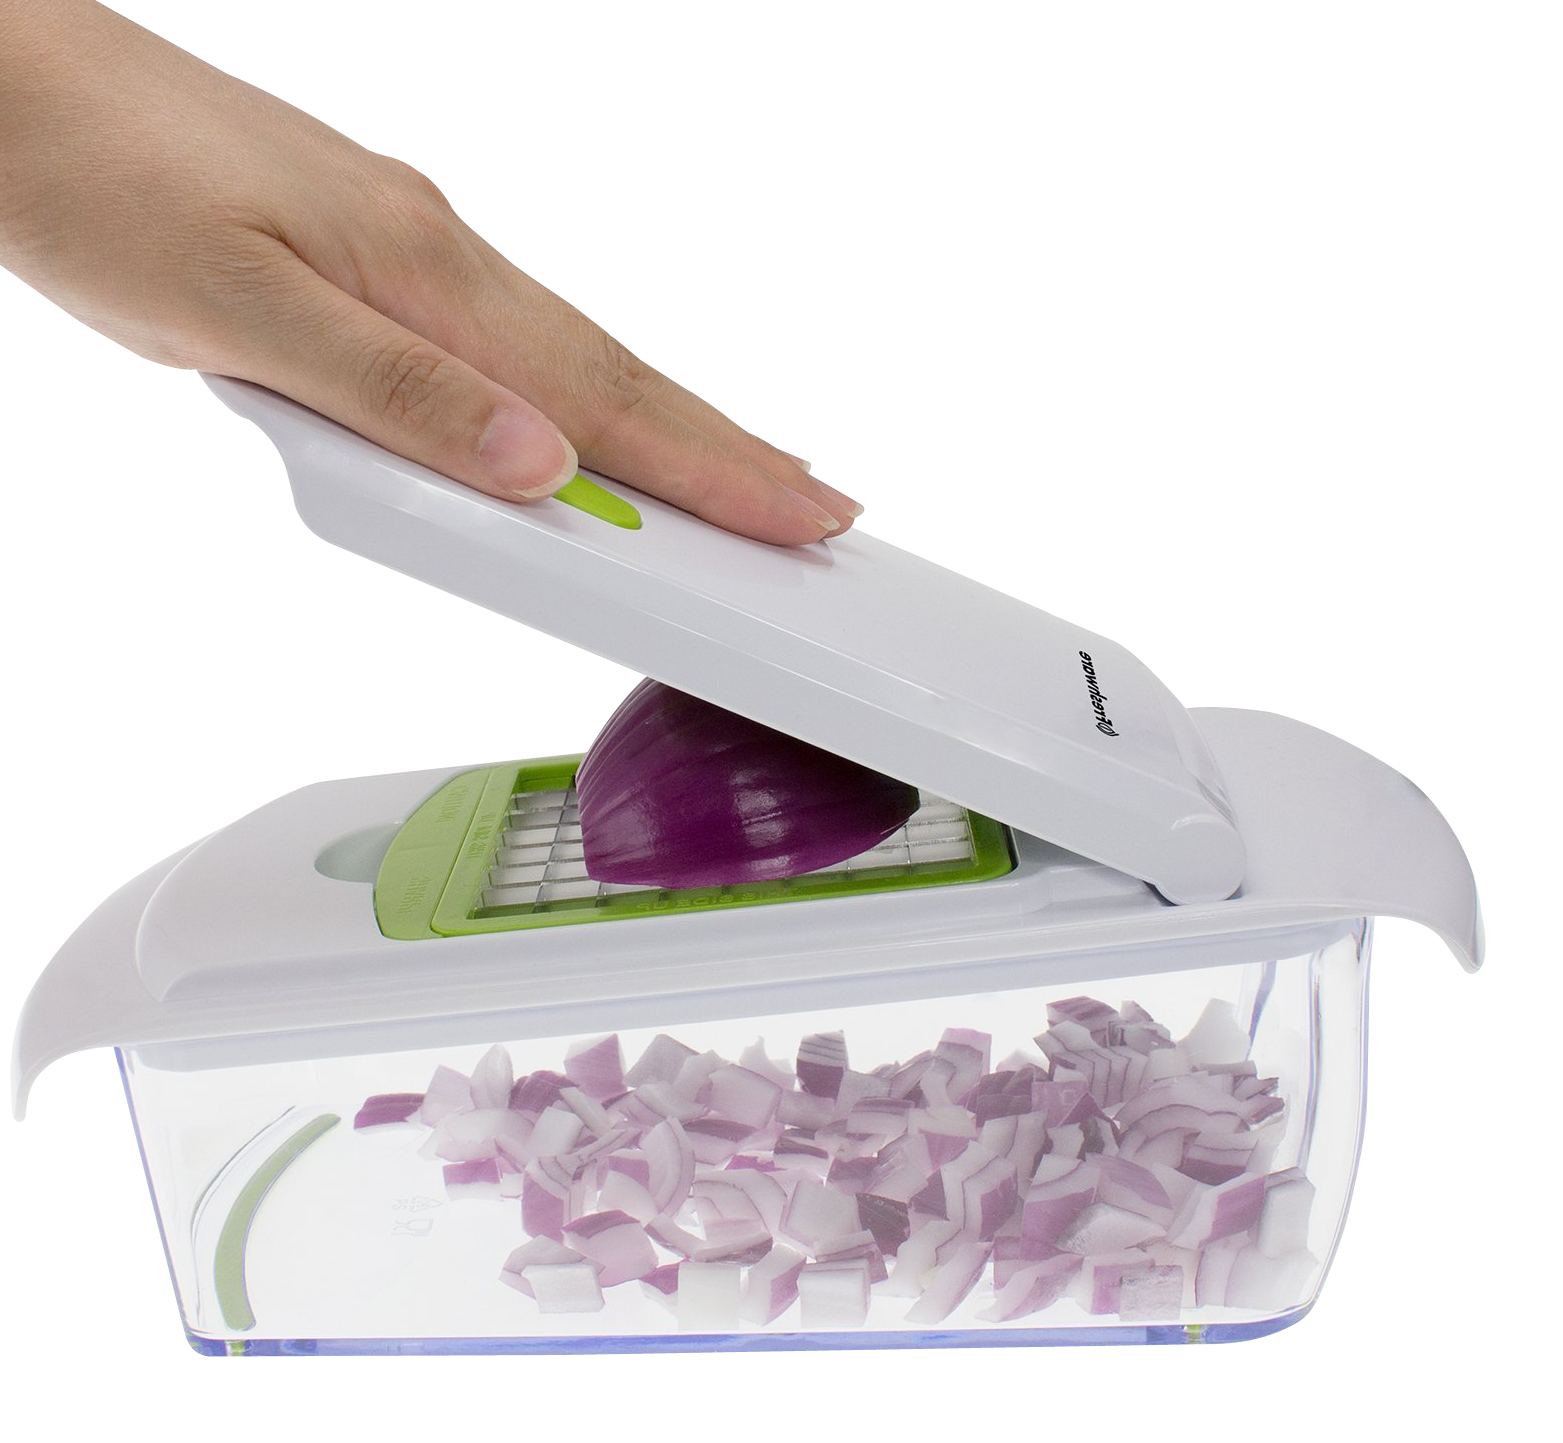 A Hand Holding A Onion Slicer